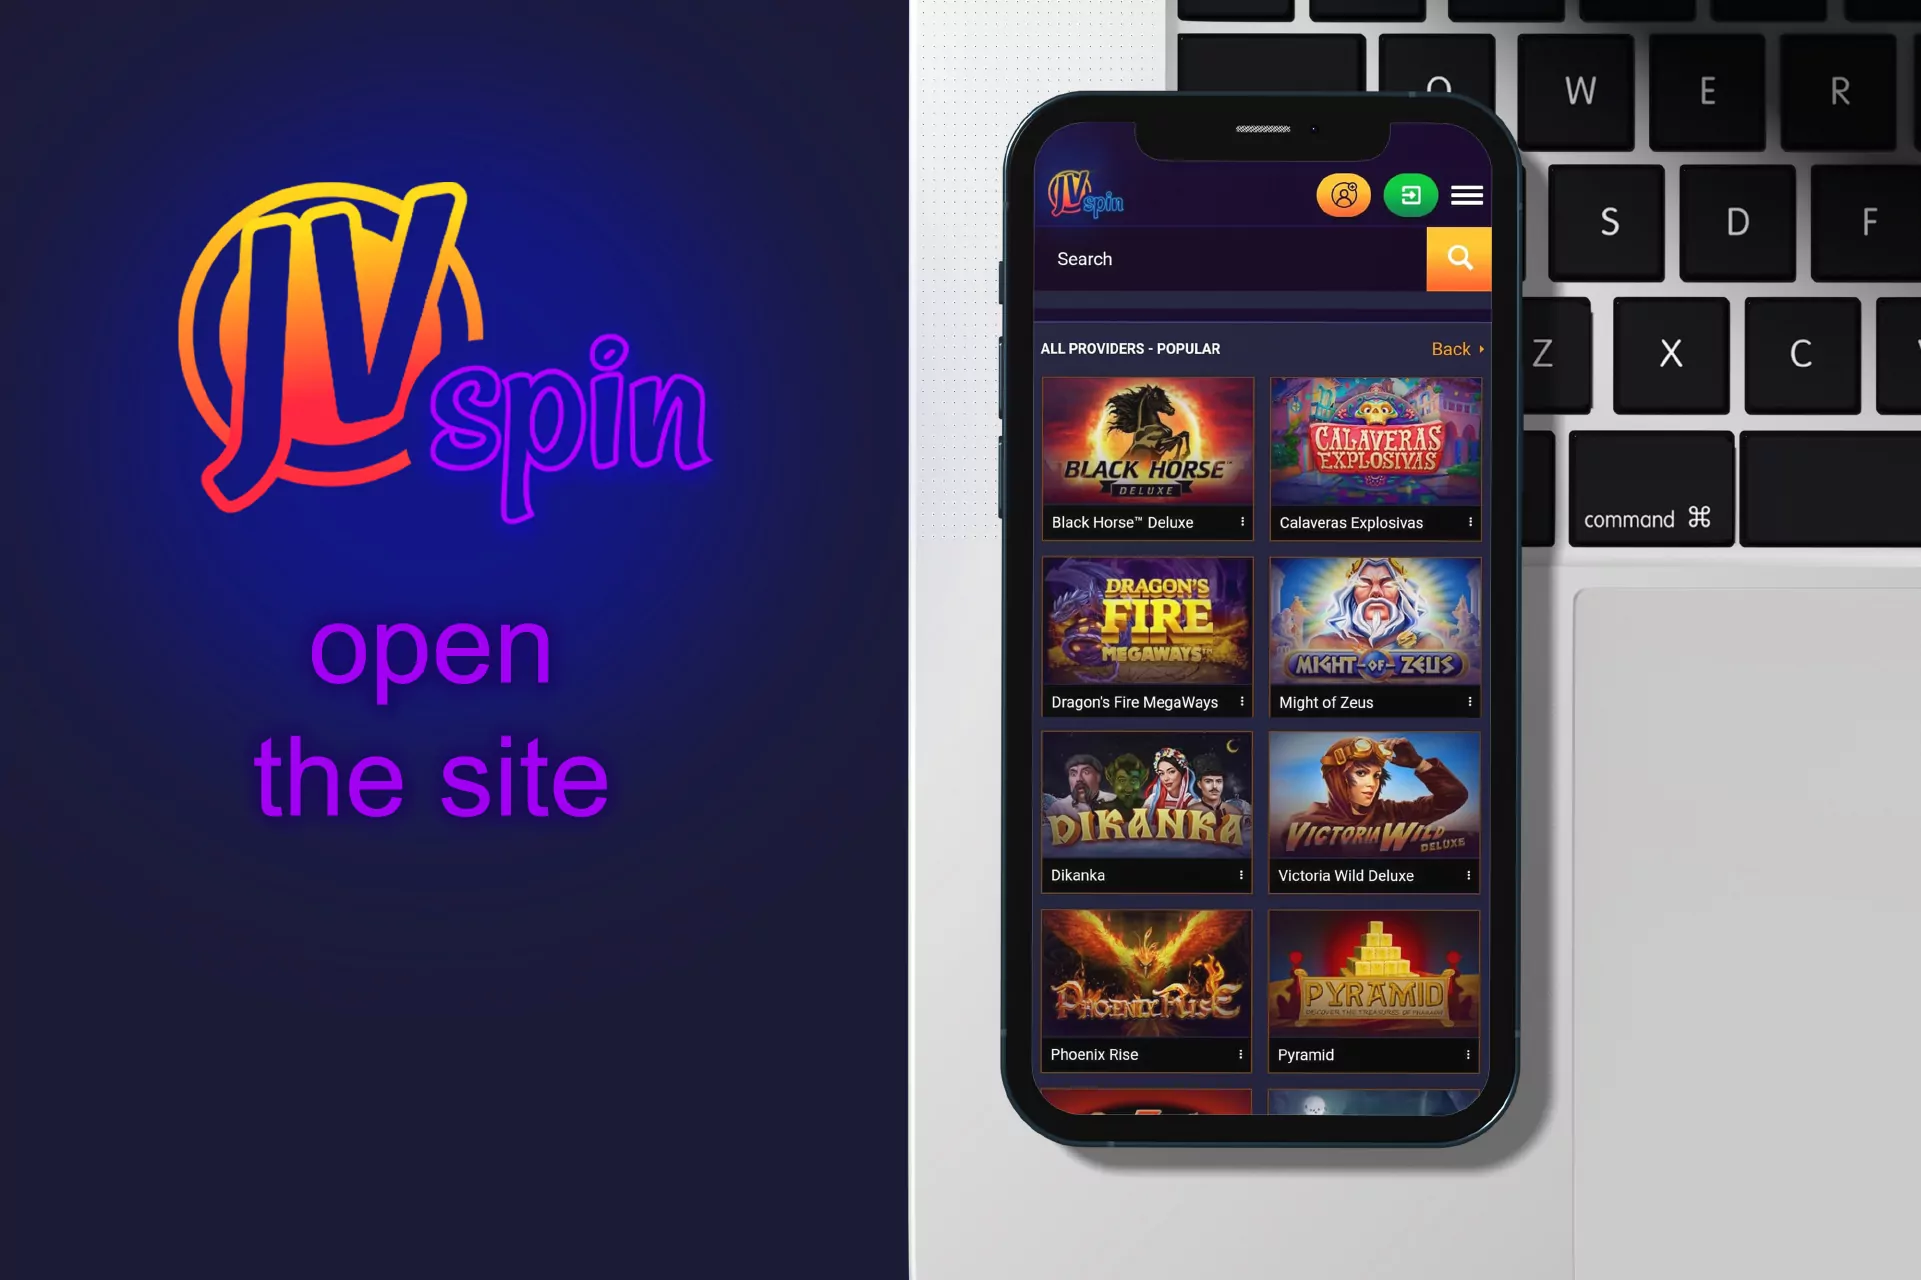 Go to the site of JVSpin in a browser on your smartphone.